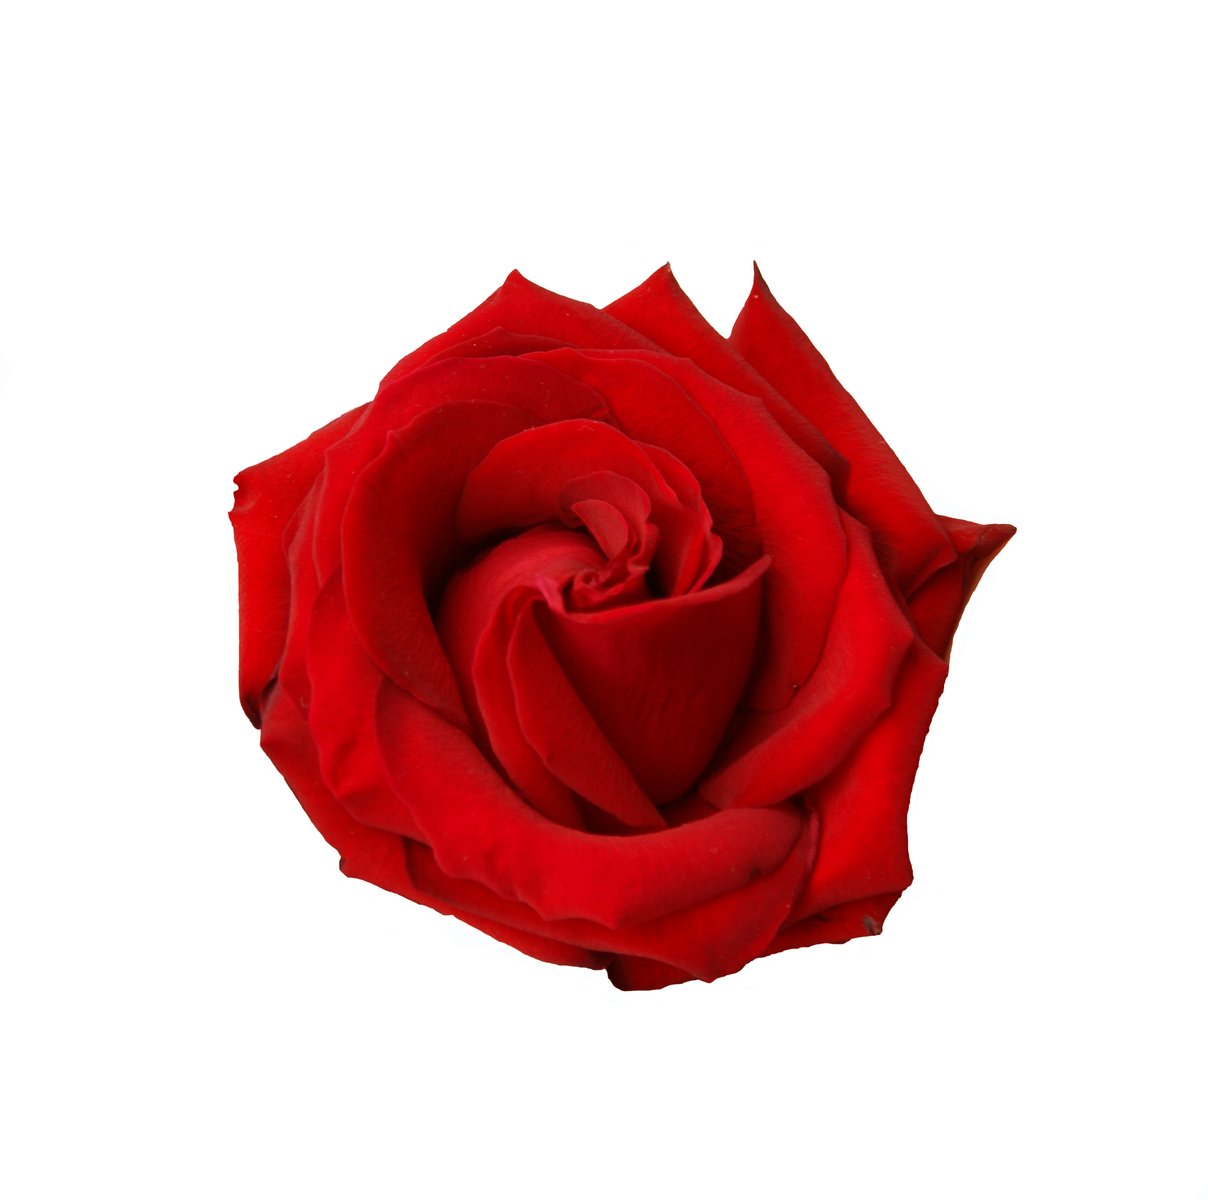 a single red rose flower with water droplets on it